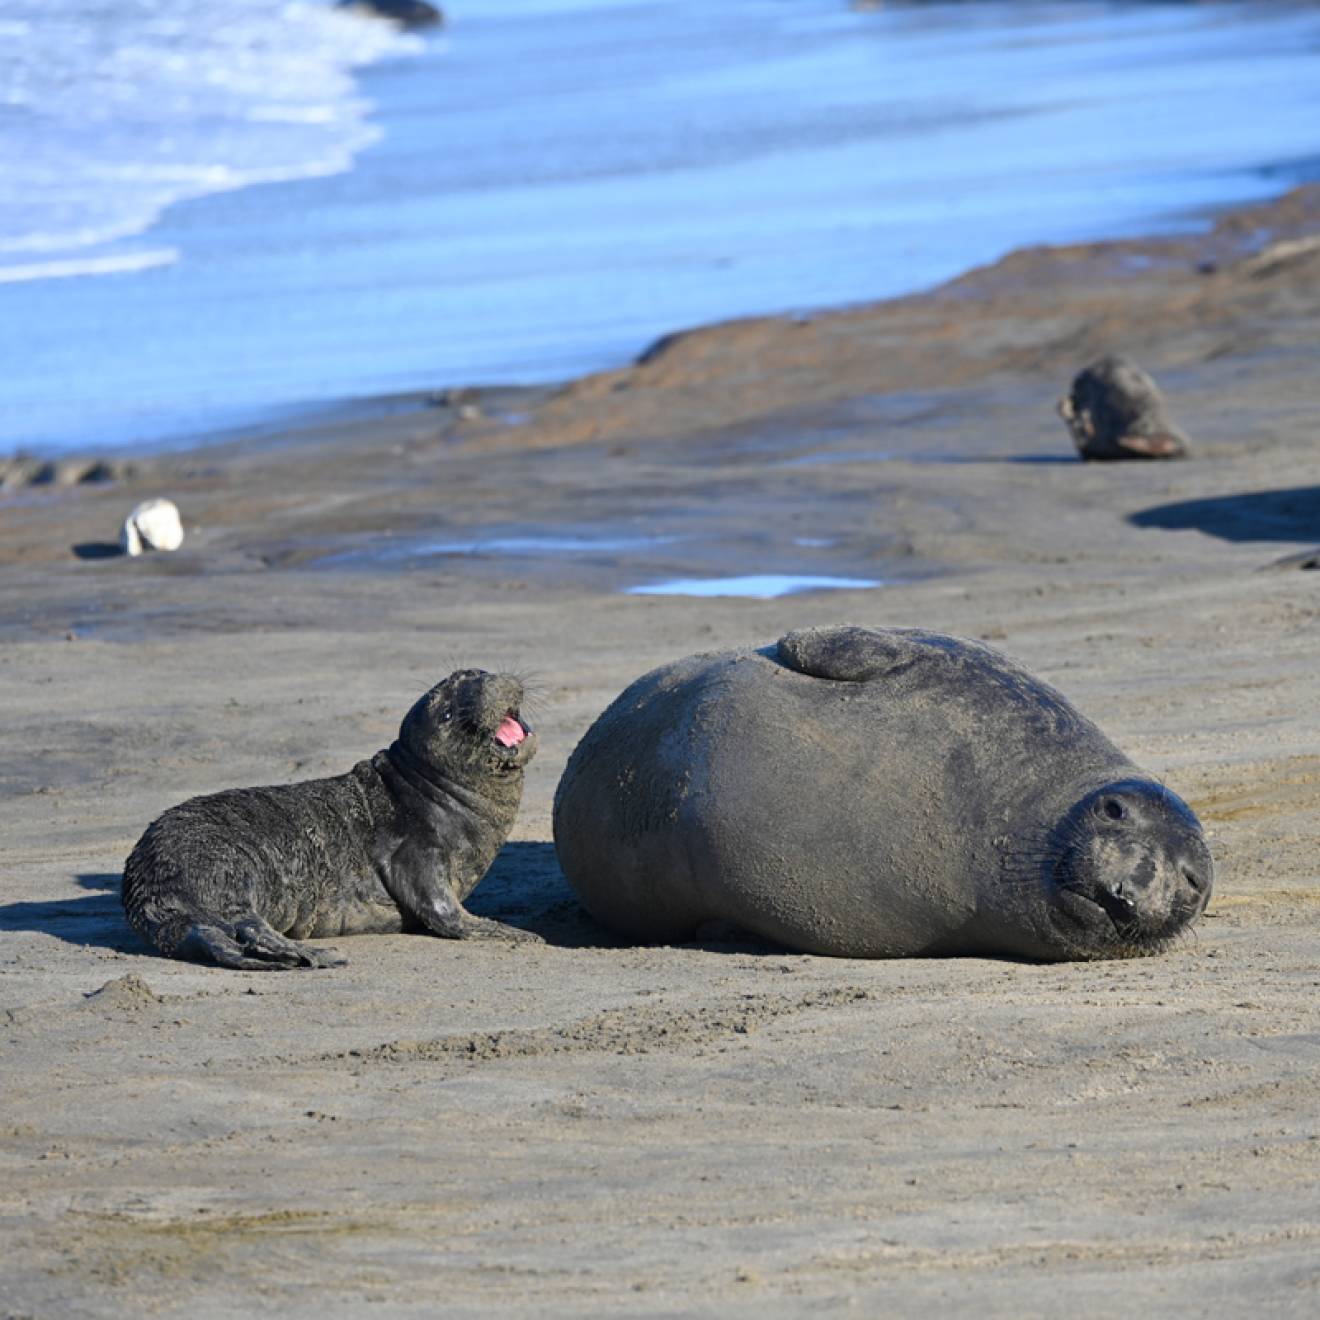 Elephant seal pup next to its mother on the beach